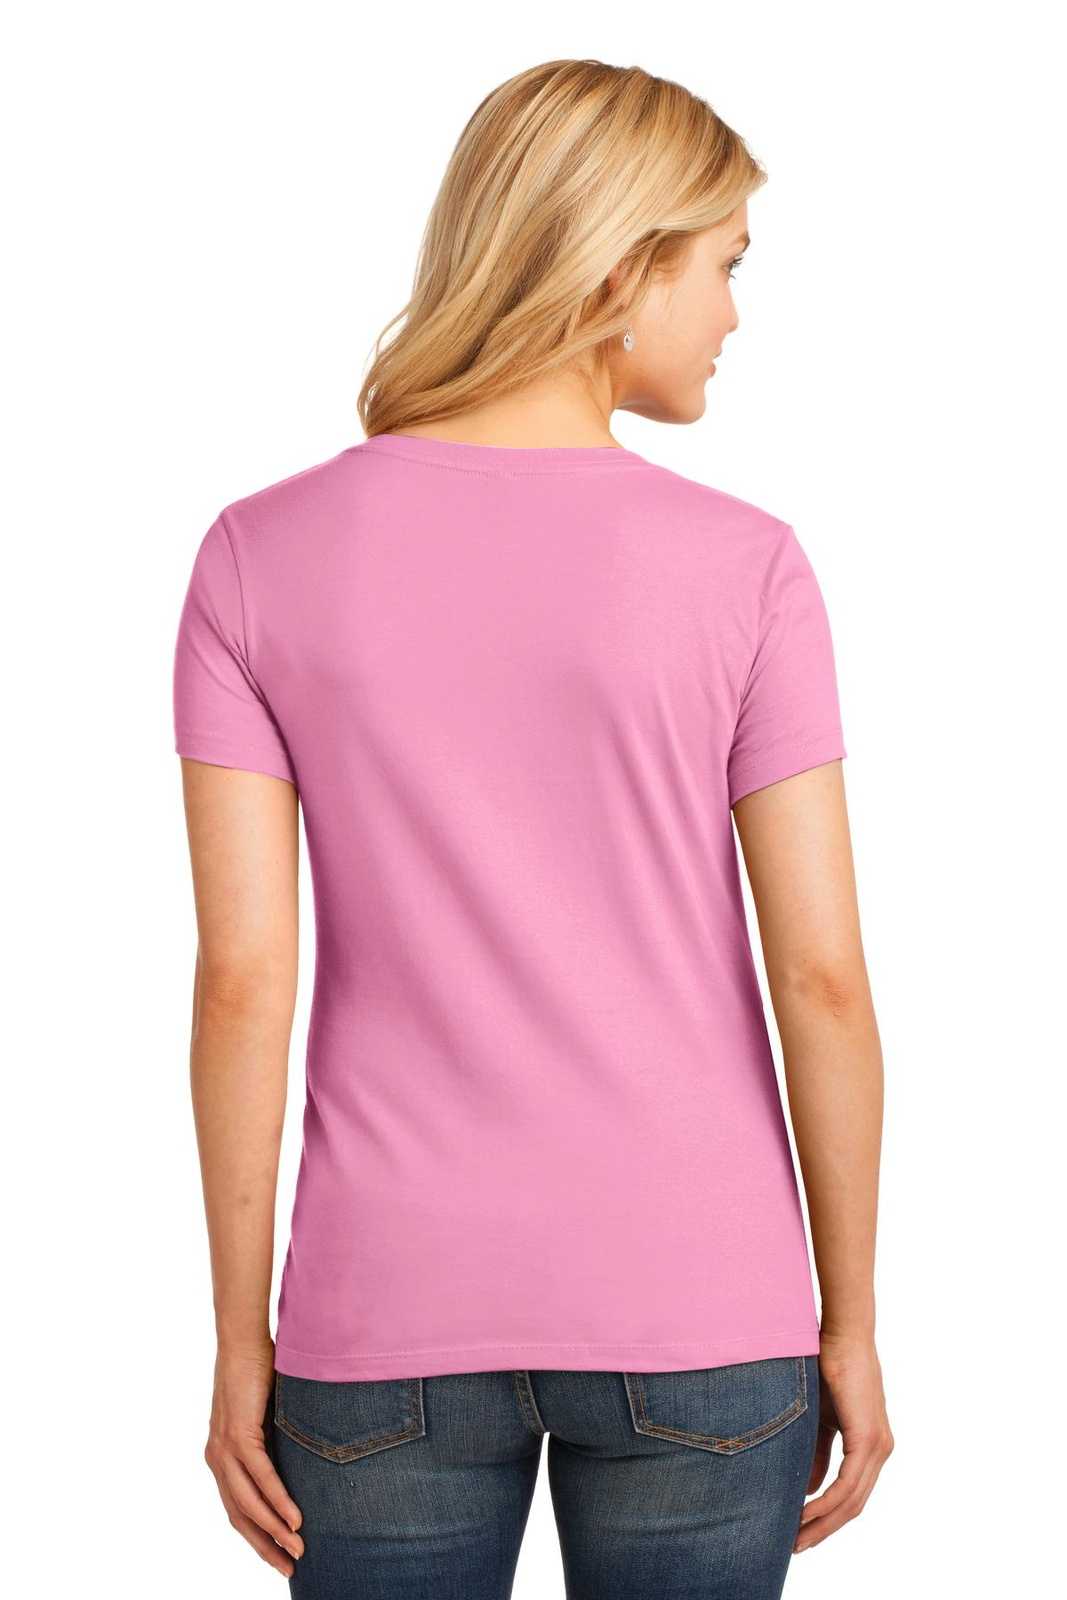 Port &amp; Company LPC54V Ladies Core Cotton V-Neck Tee - Candy Pink - HIT a Double - 2